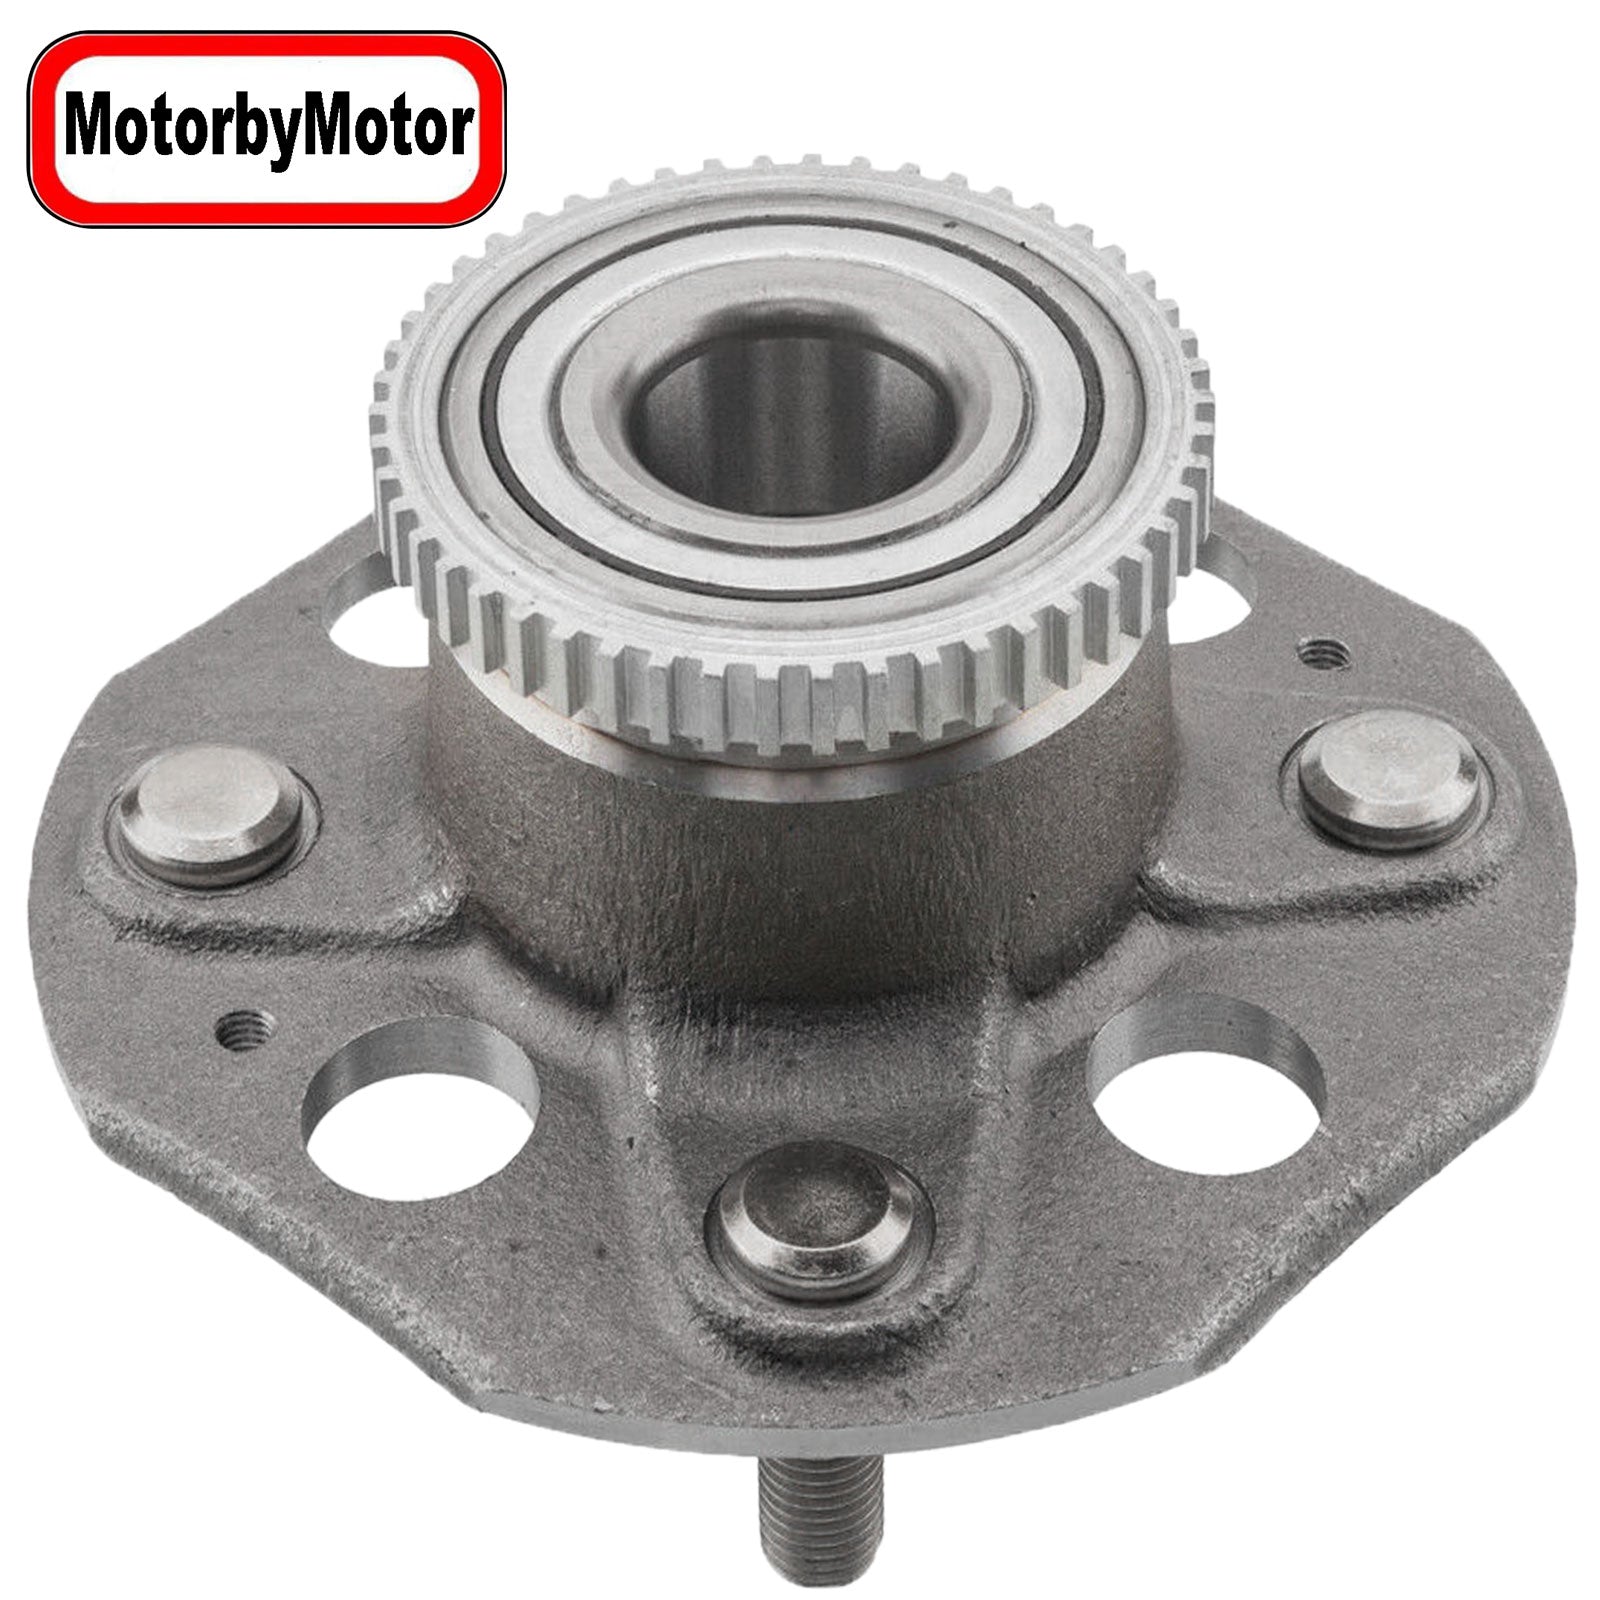 MotorbyMotor 512178 Rear Wheel Bearing Hub Assembly 2WD with 4 Lugs Honda Accord Low-Runout OE Directly Replacement (2WD FWD, w/ABS) MotorbyMotor